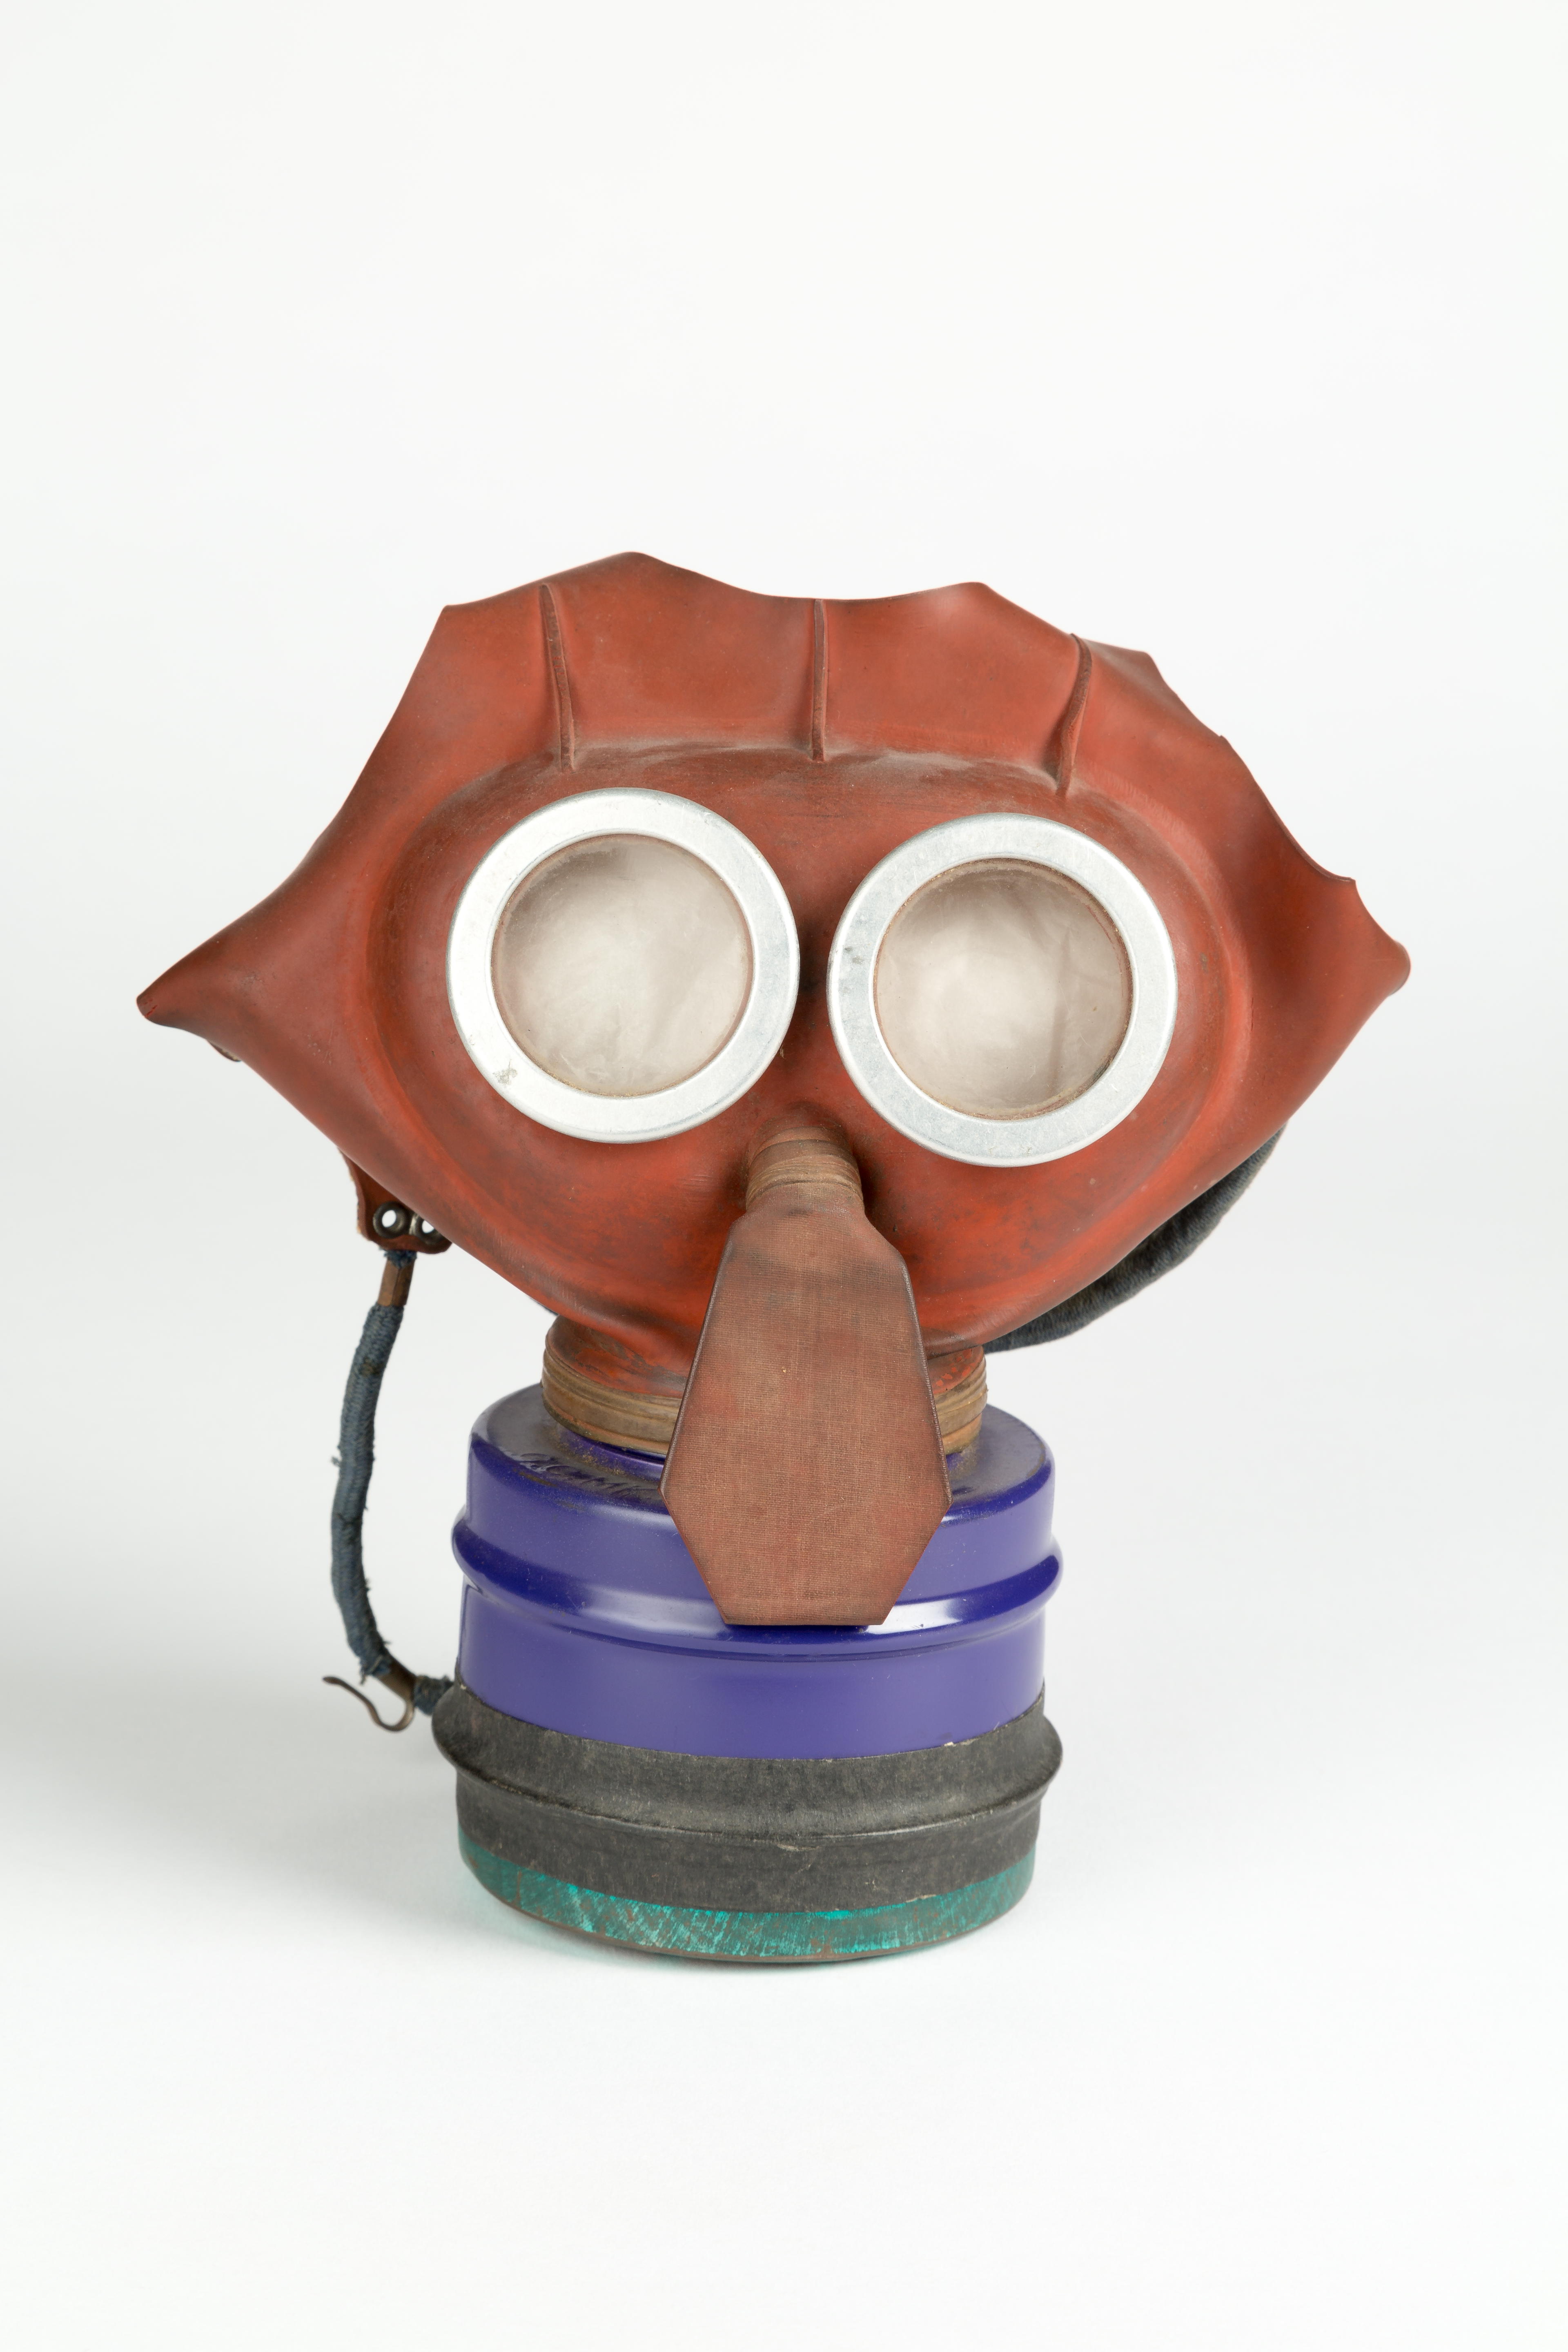 Child gas mask, used in early 1940.